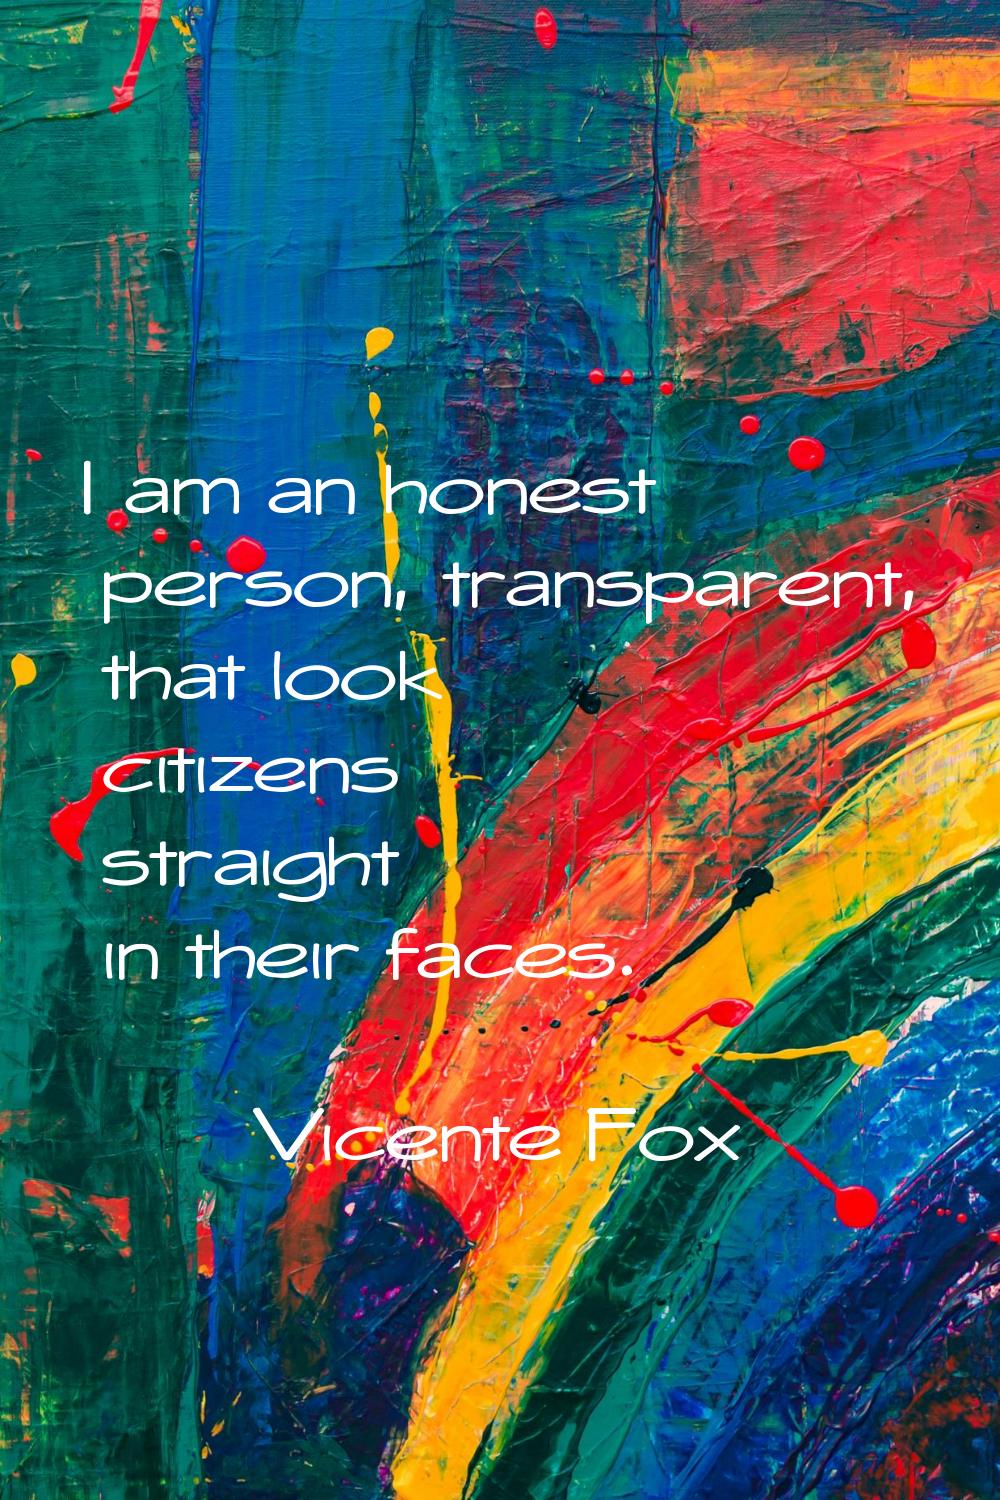 I am an honest person, transparent, that look citizens straight in their faces.